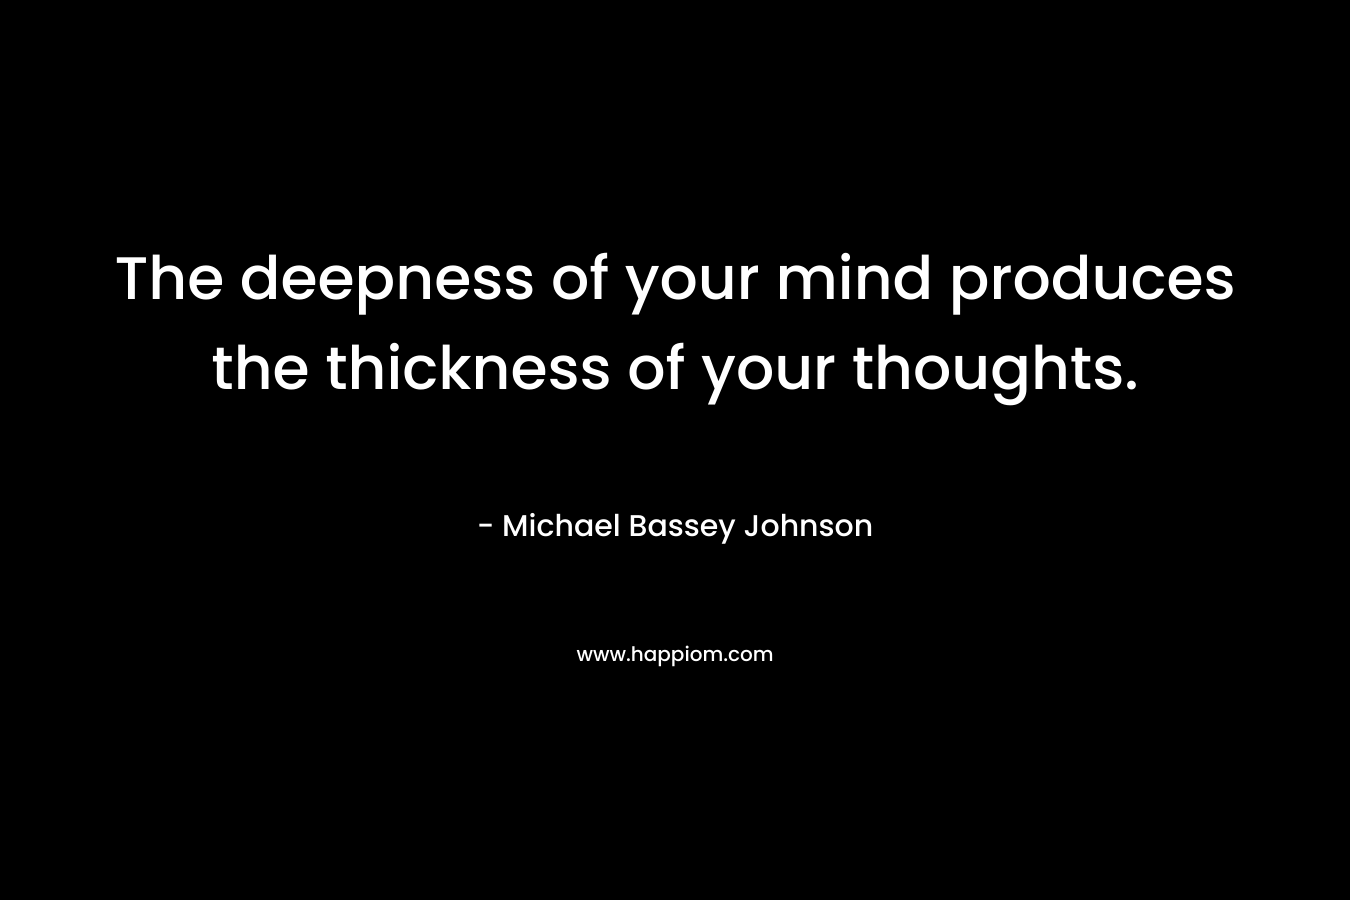 The deepness of your mind produces the thickness of your thoughts.